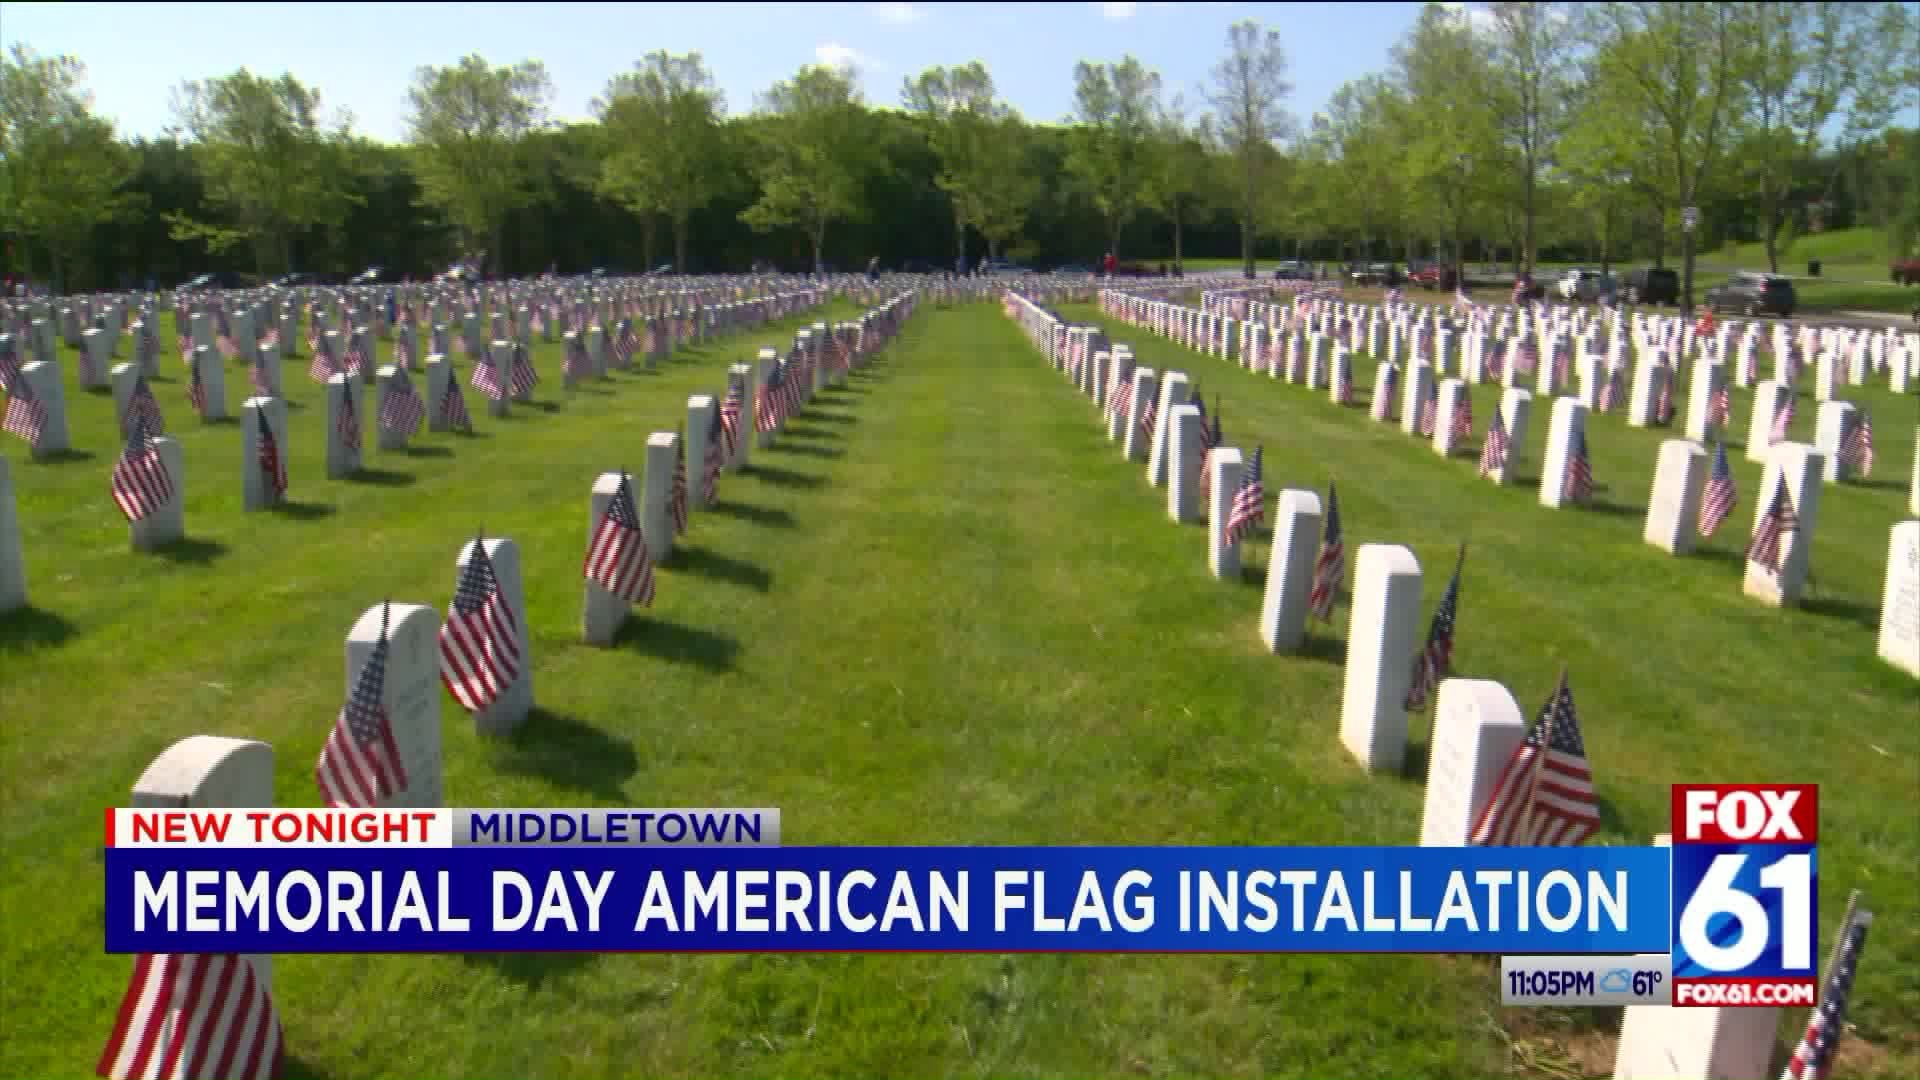 Over 10,000 flags placed in honor of Fallen Heroes